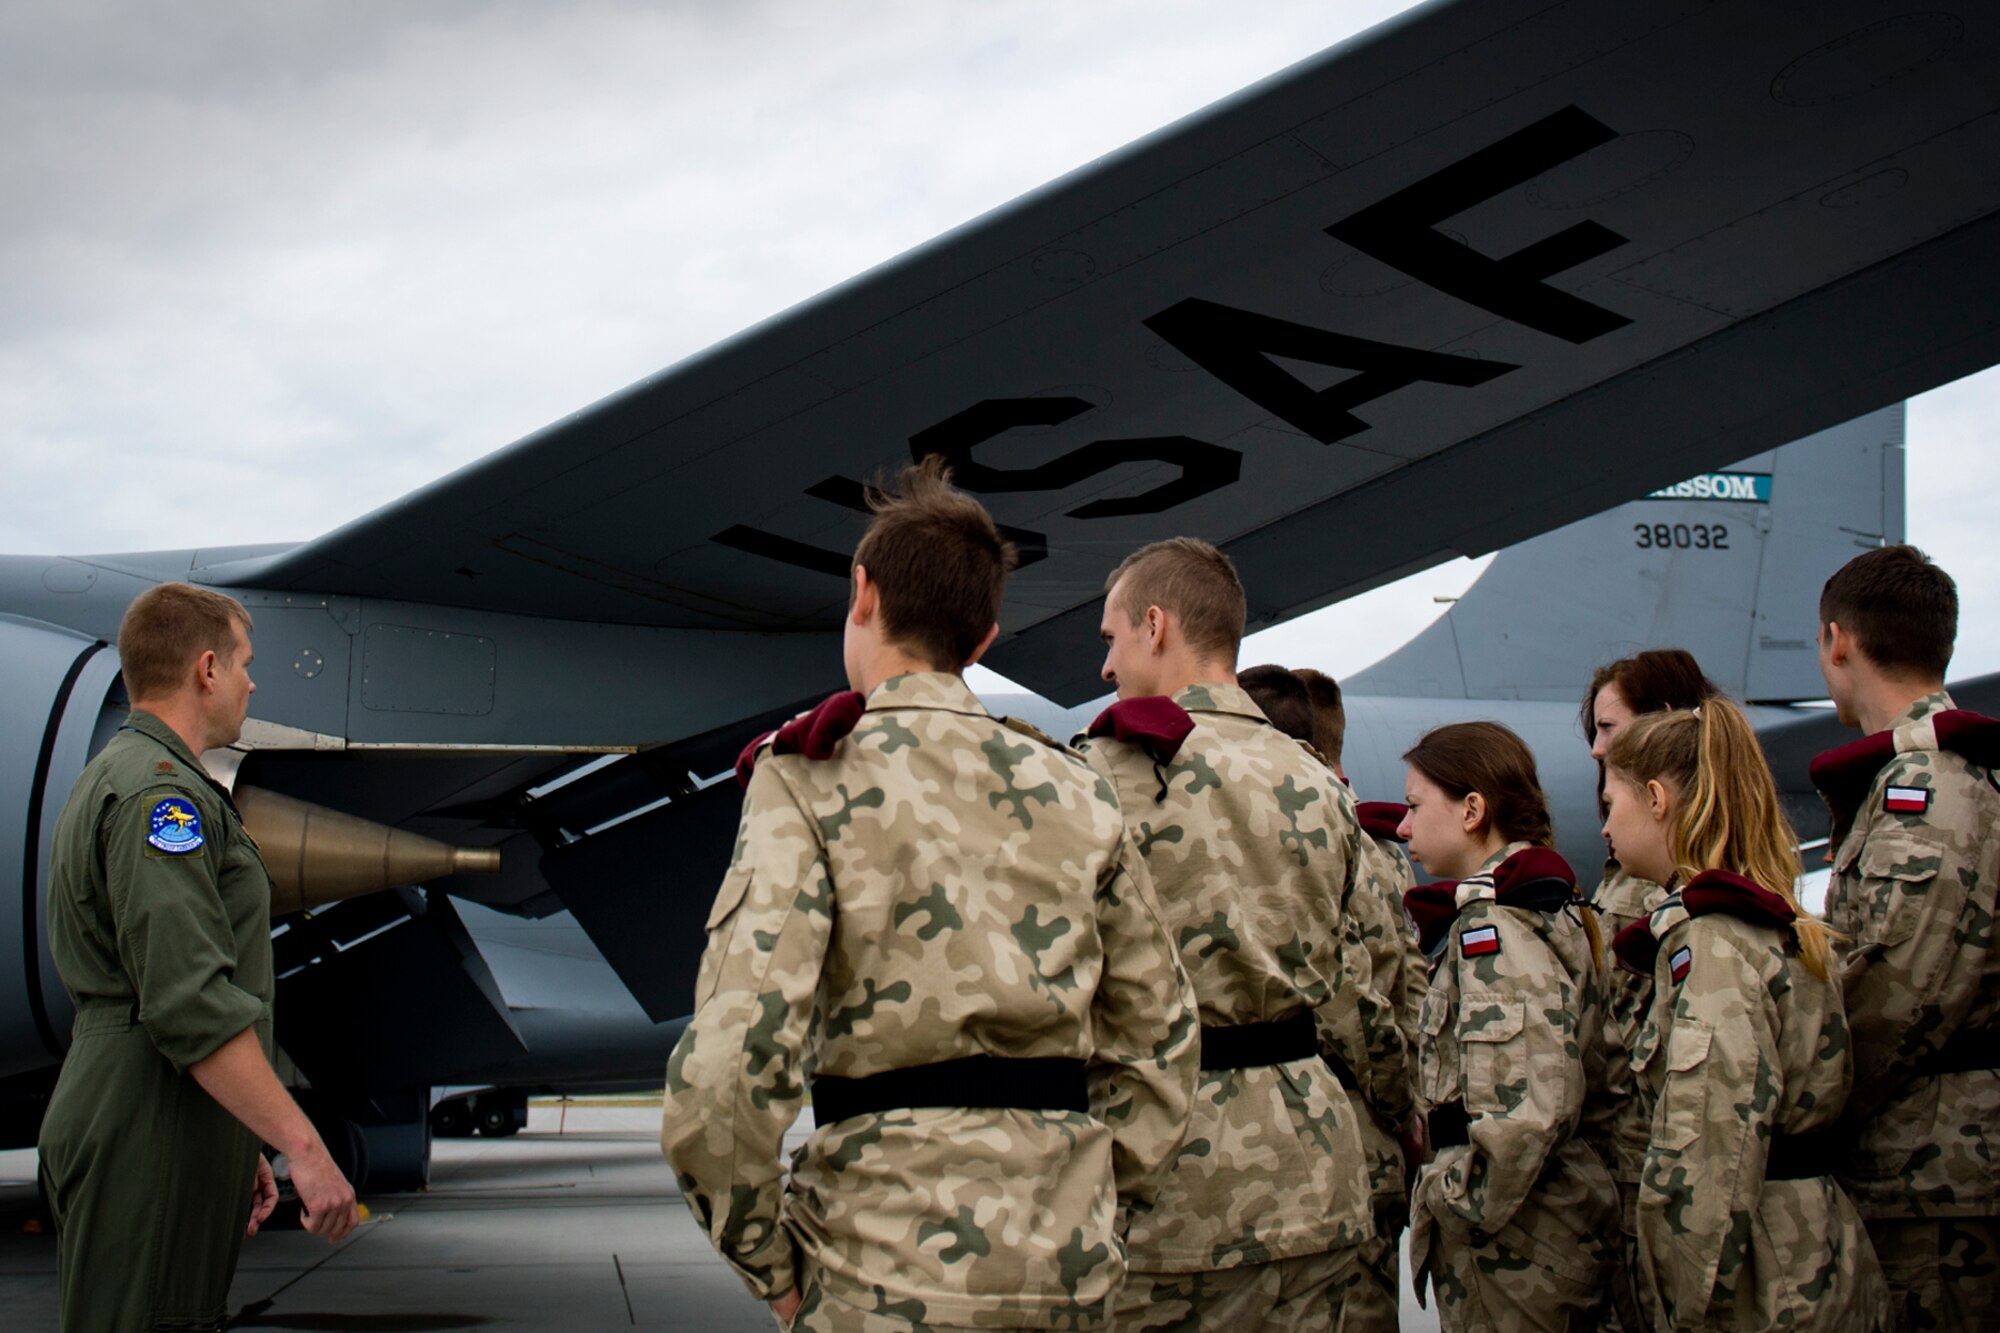 Major Micah Jones, 434th Air Refueling Wing KC-135 Stratotanker pilot, teaches high school students from a military class at Adam Mickiewicz High School Complex, Kleczew, Poland, about the KC-135 Stratotanker at Powidz Air Base, Poland, where the 434th and 100th ARWs are based while taking part in Baltic Operations 2016, June 9, 2016. This event allowed a younger generation from Poland to interact with U.S. Airmen and see firsthand how the U.S. Air Force operates. (U.S. Air Force photo/Senior Airman Erin Babis)